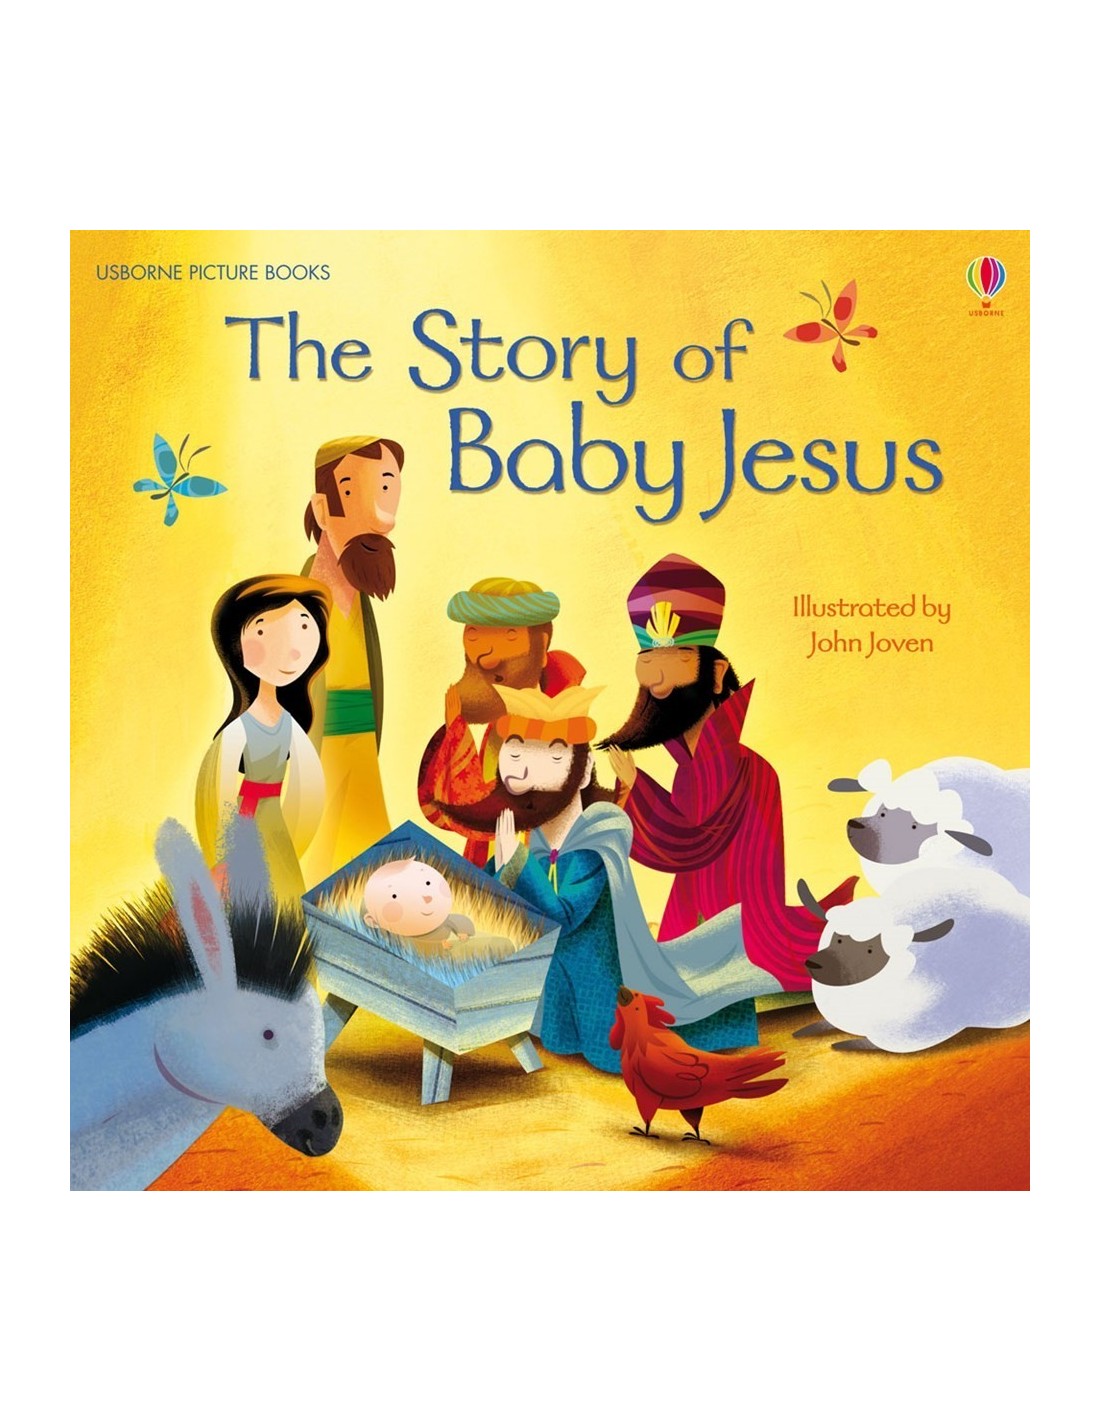 The story of baby Jesus